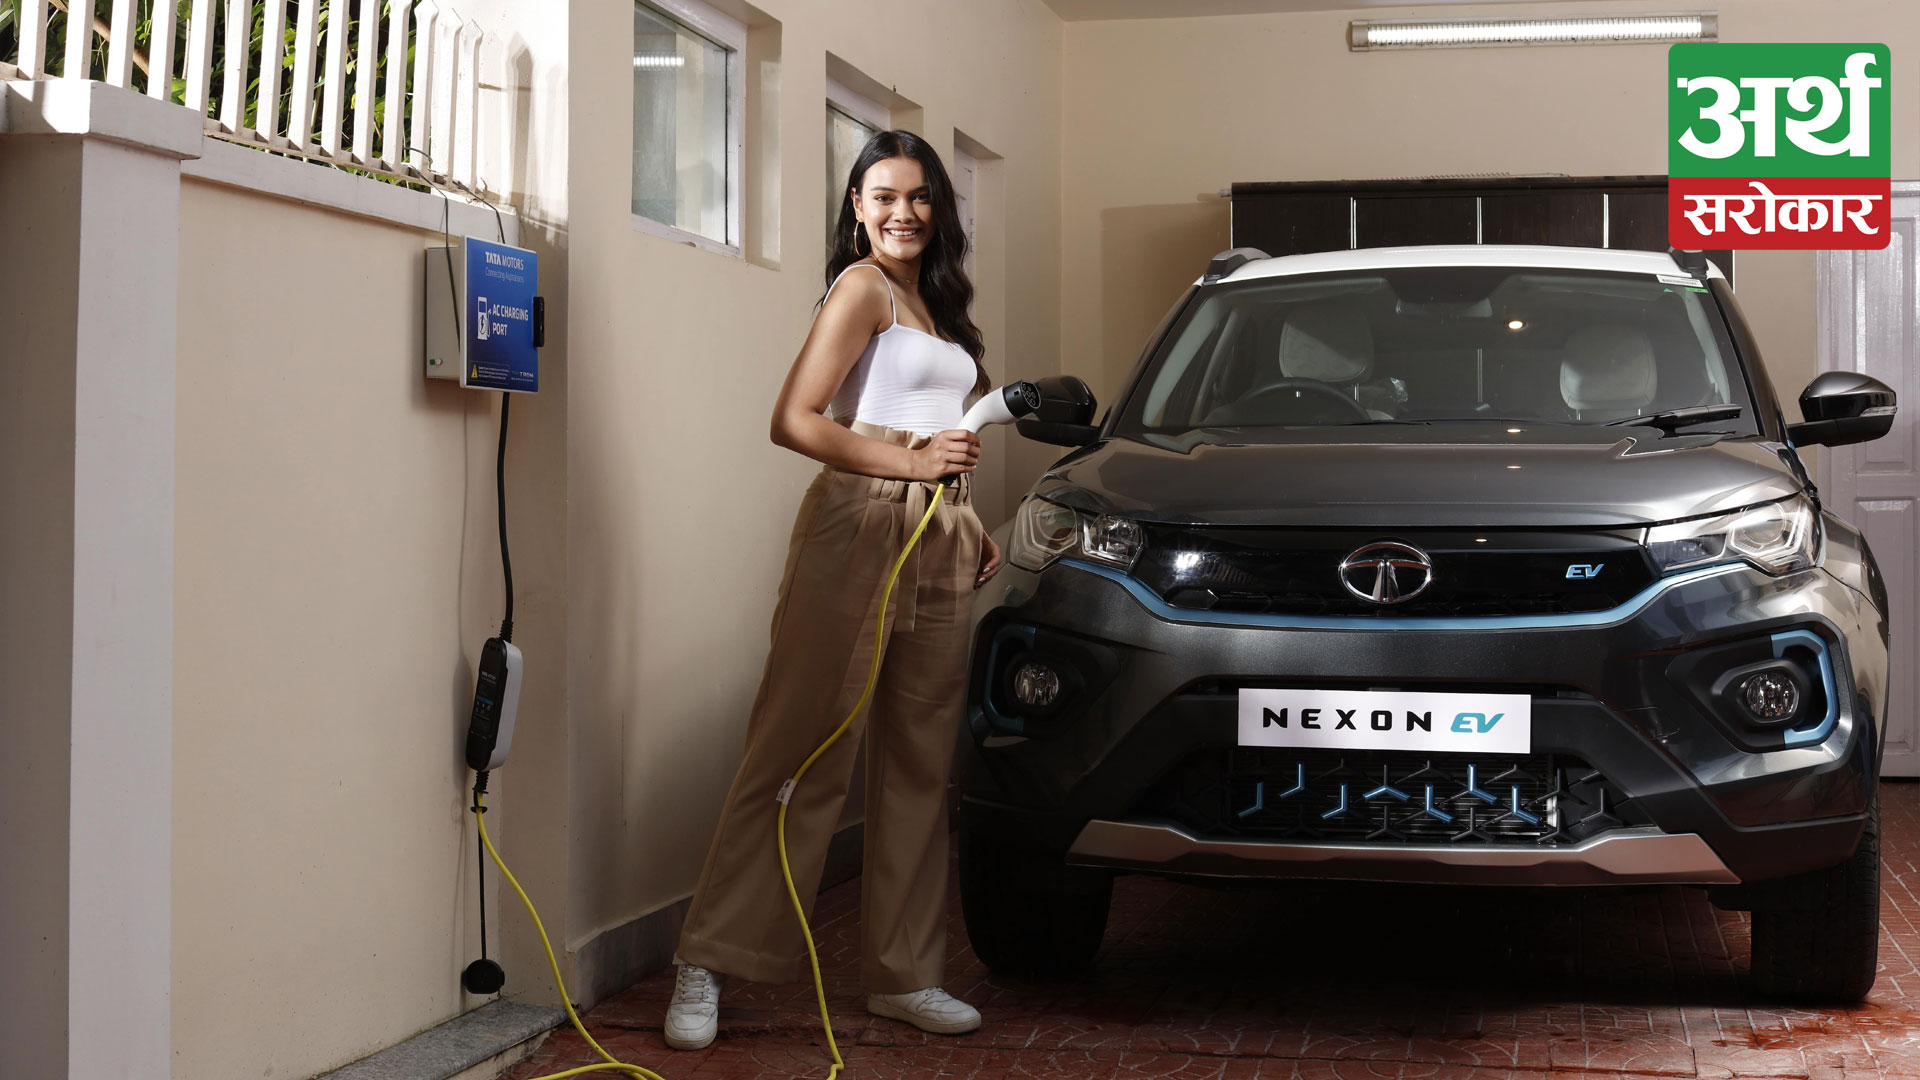 Buying an EV from Tata Motors gets more easy